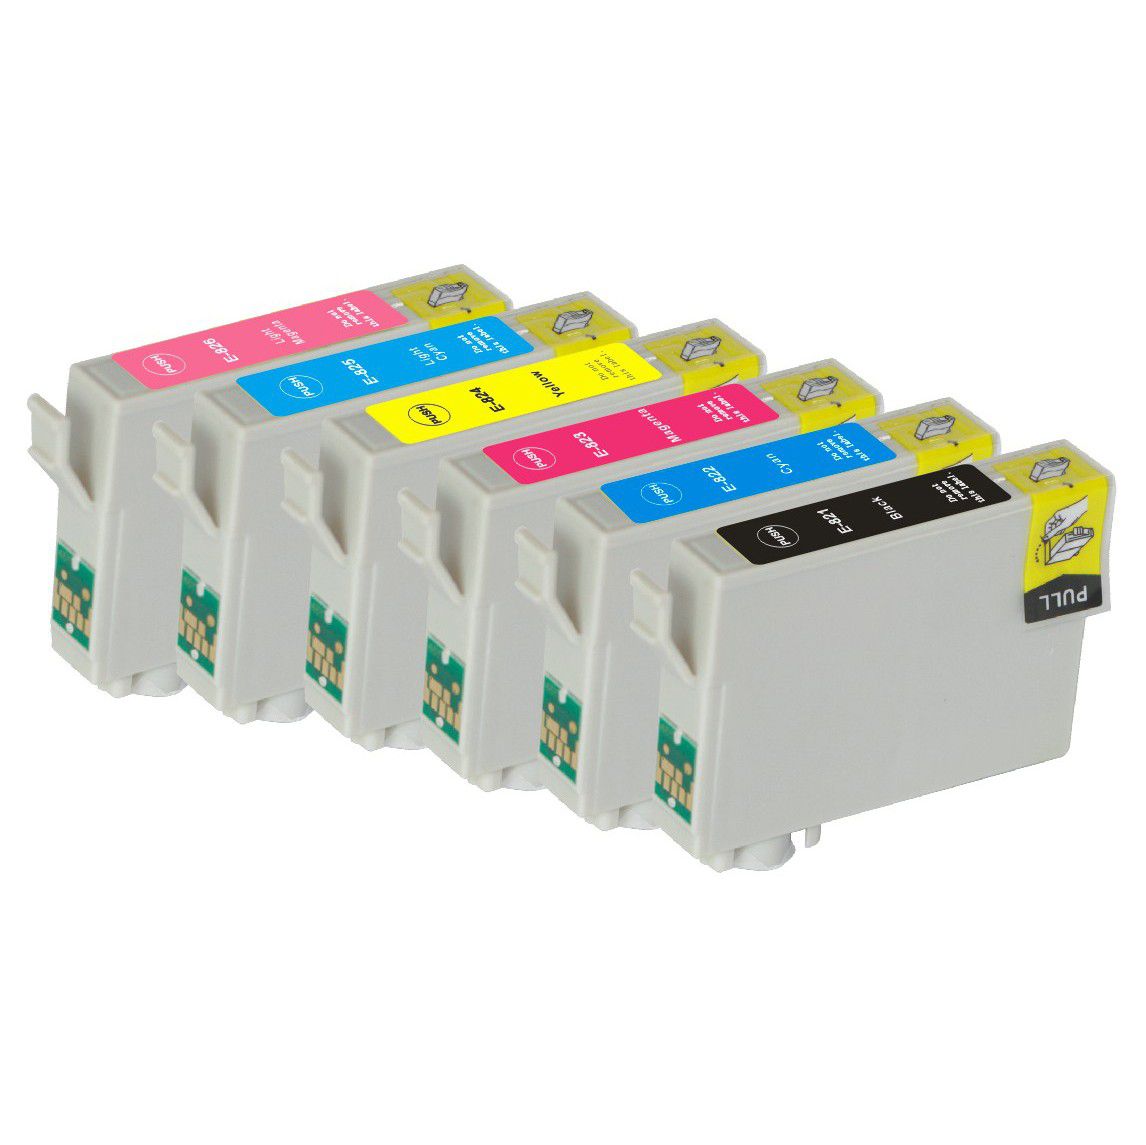 Compatible ink cartridge for Epson T0821-6